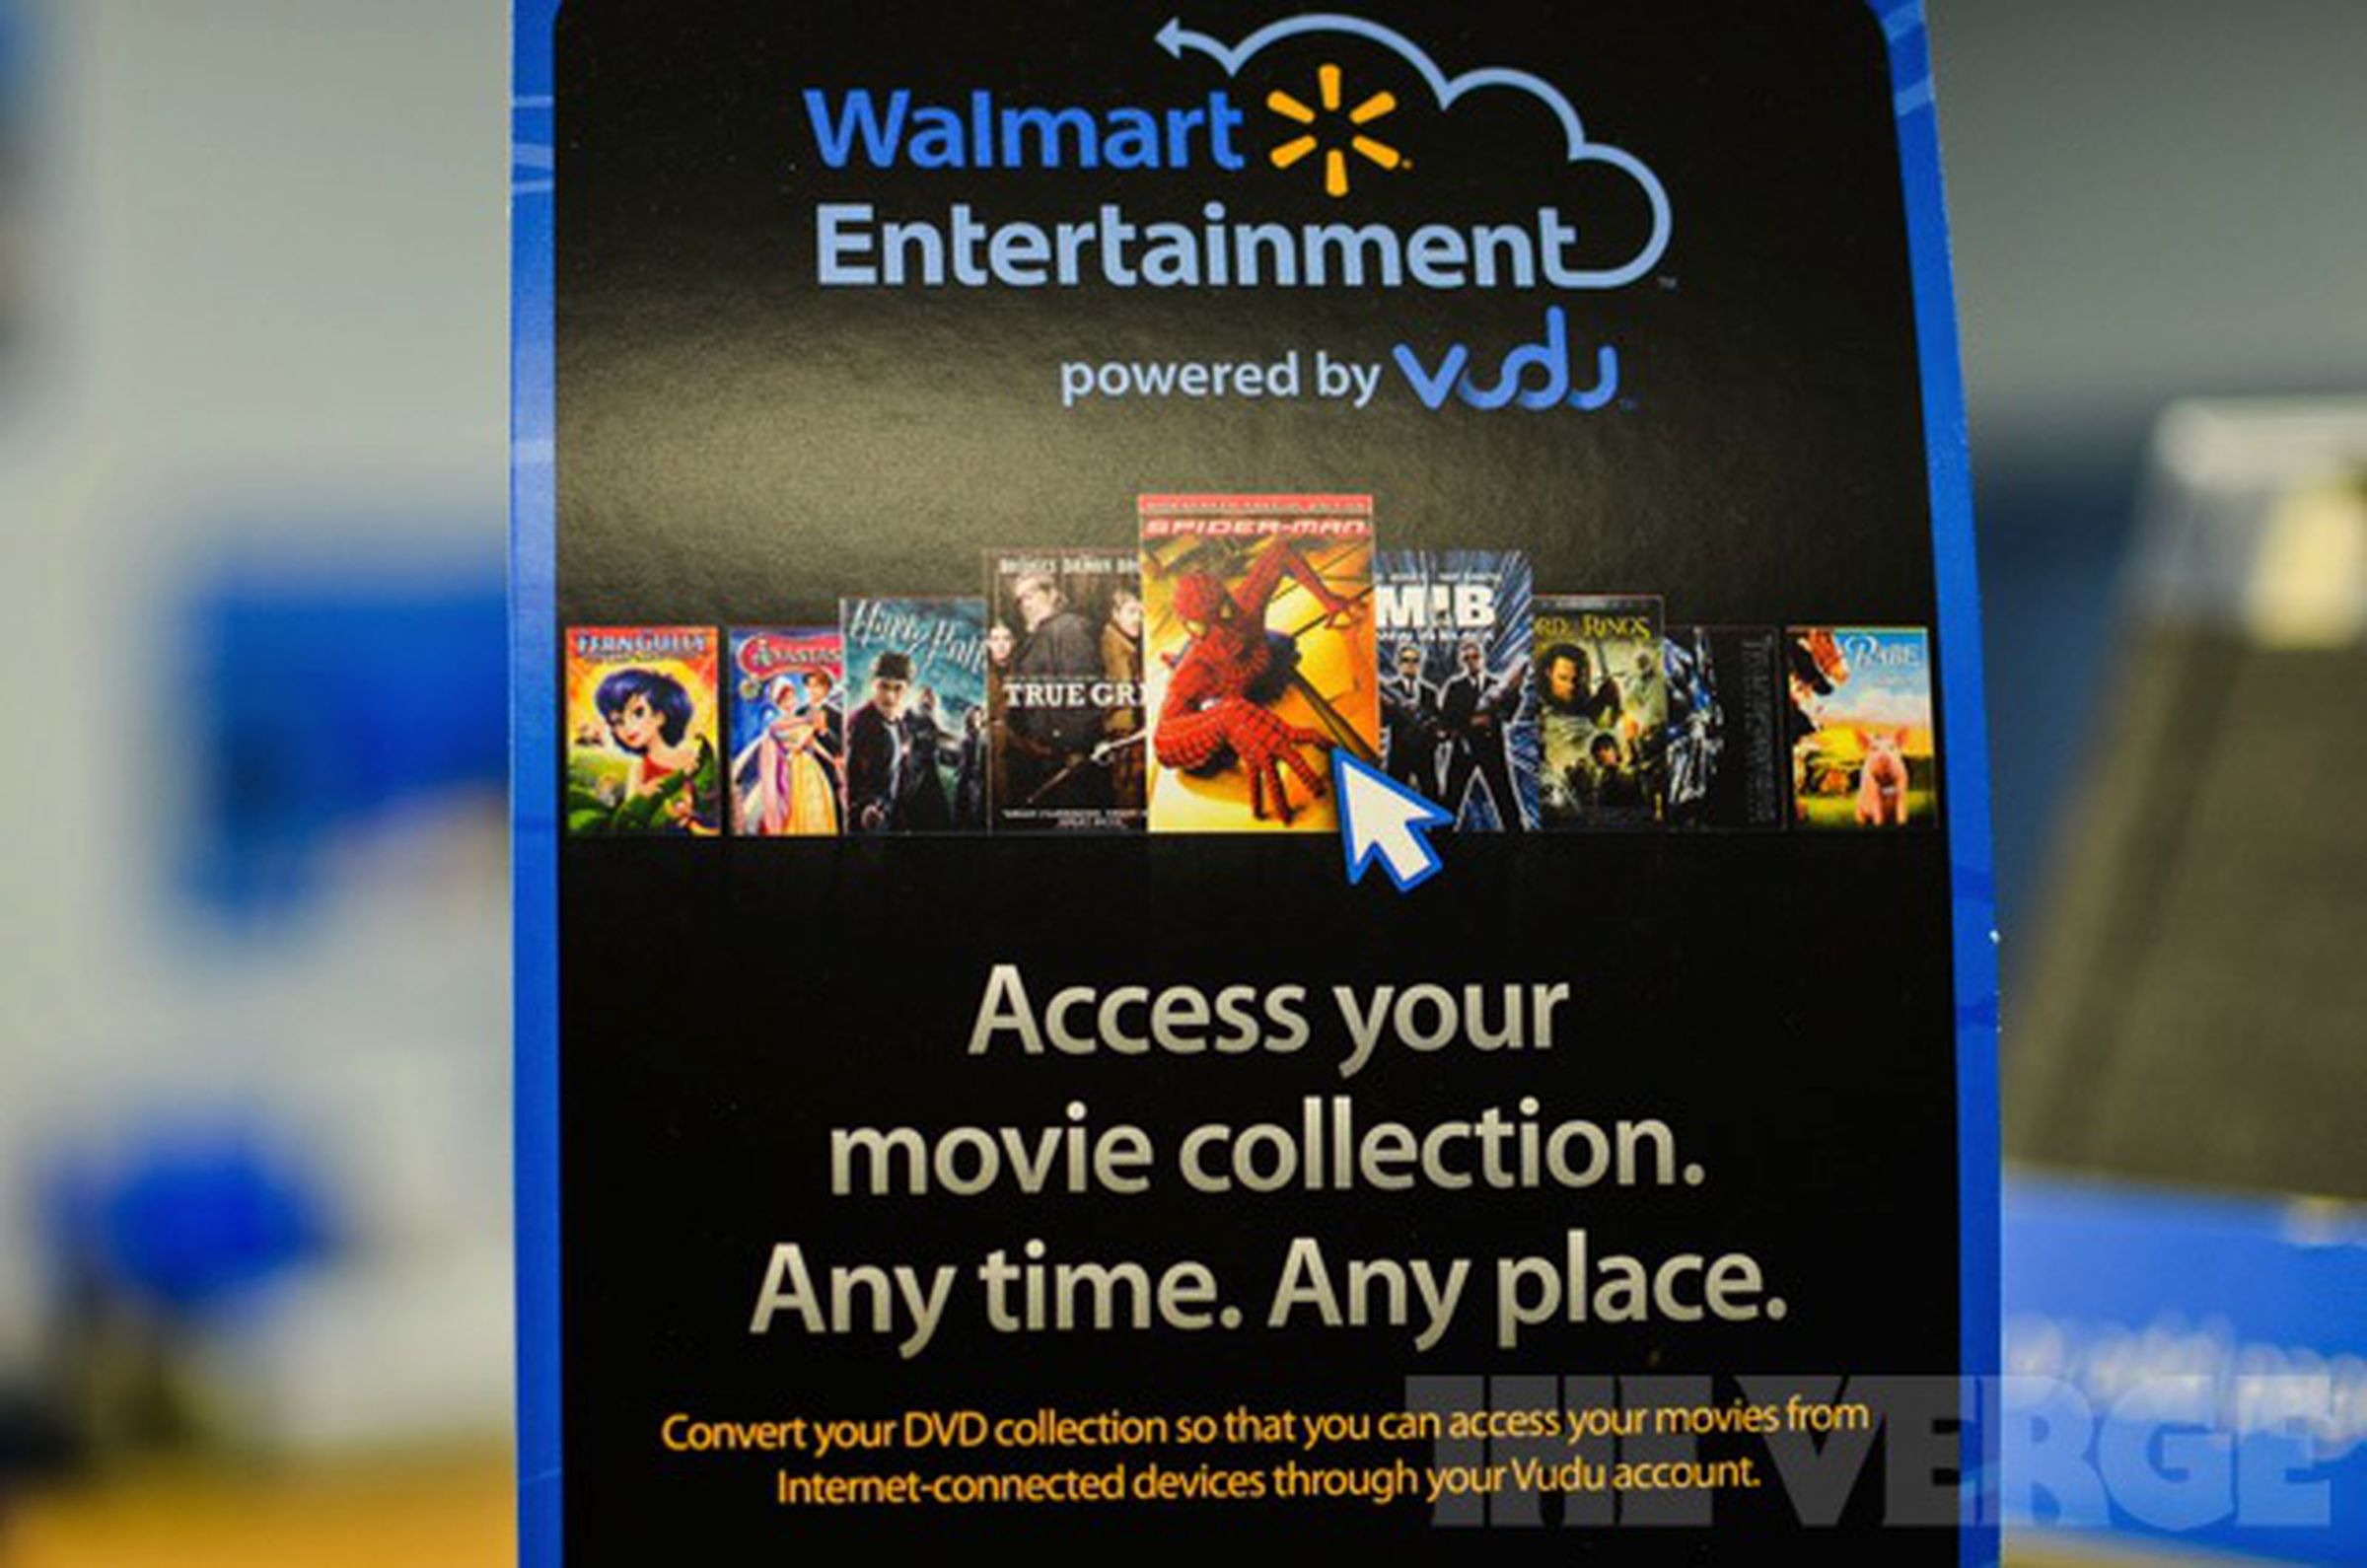 Walmart has been trying to figure out digital entertainment for a long time. A long time.